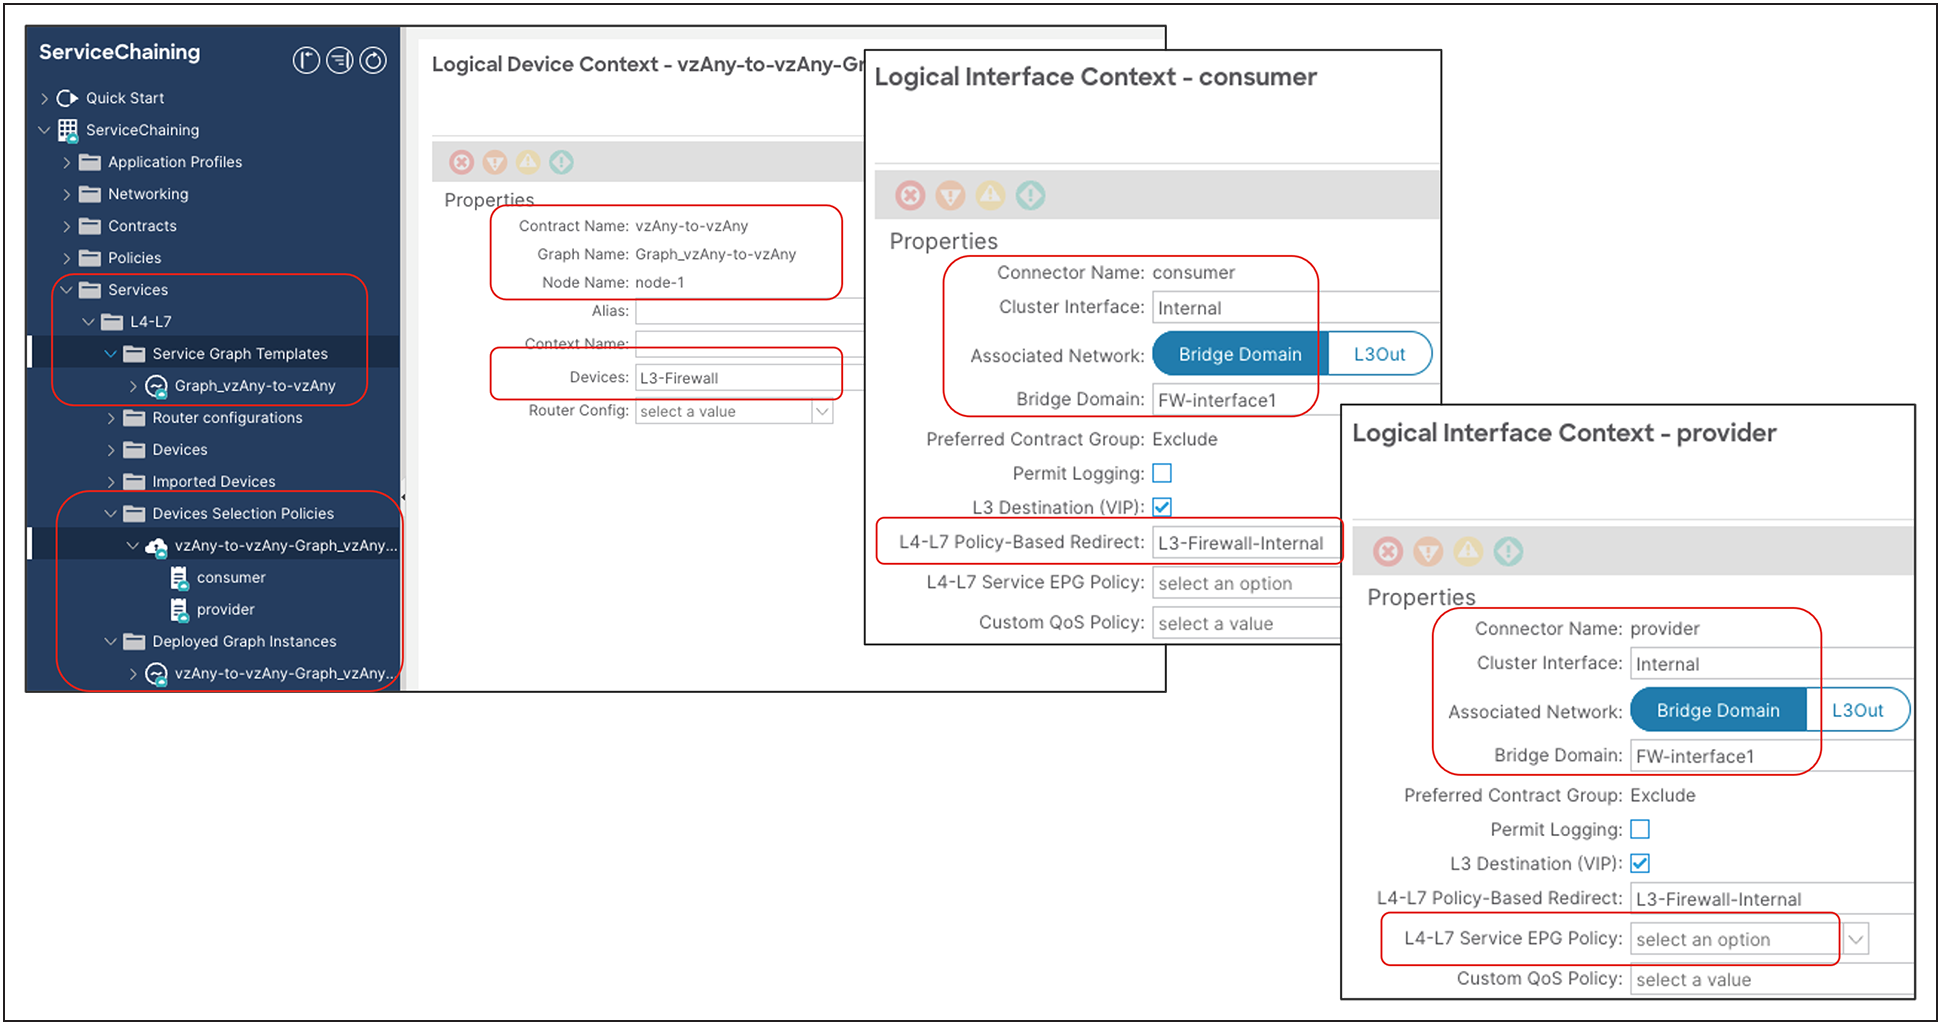 Verify the configuration on APIC (Device Selection Policy and Deployed Graph Instance)